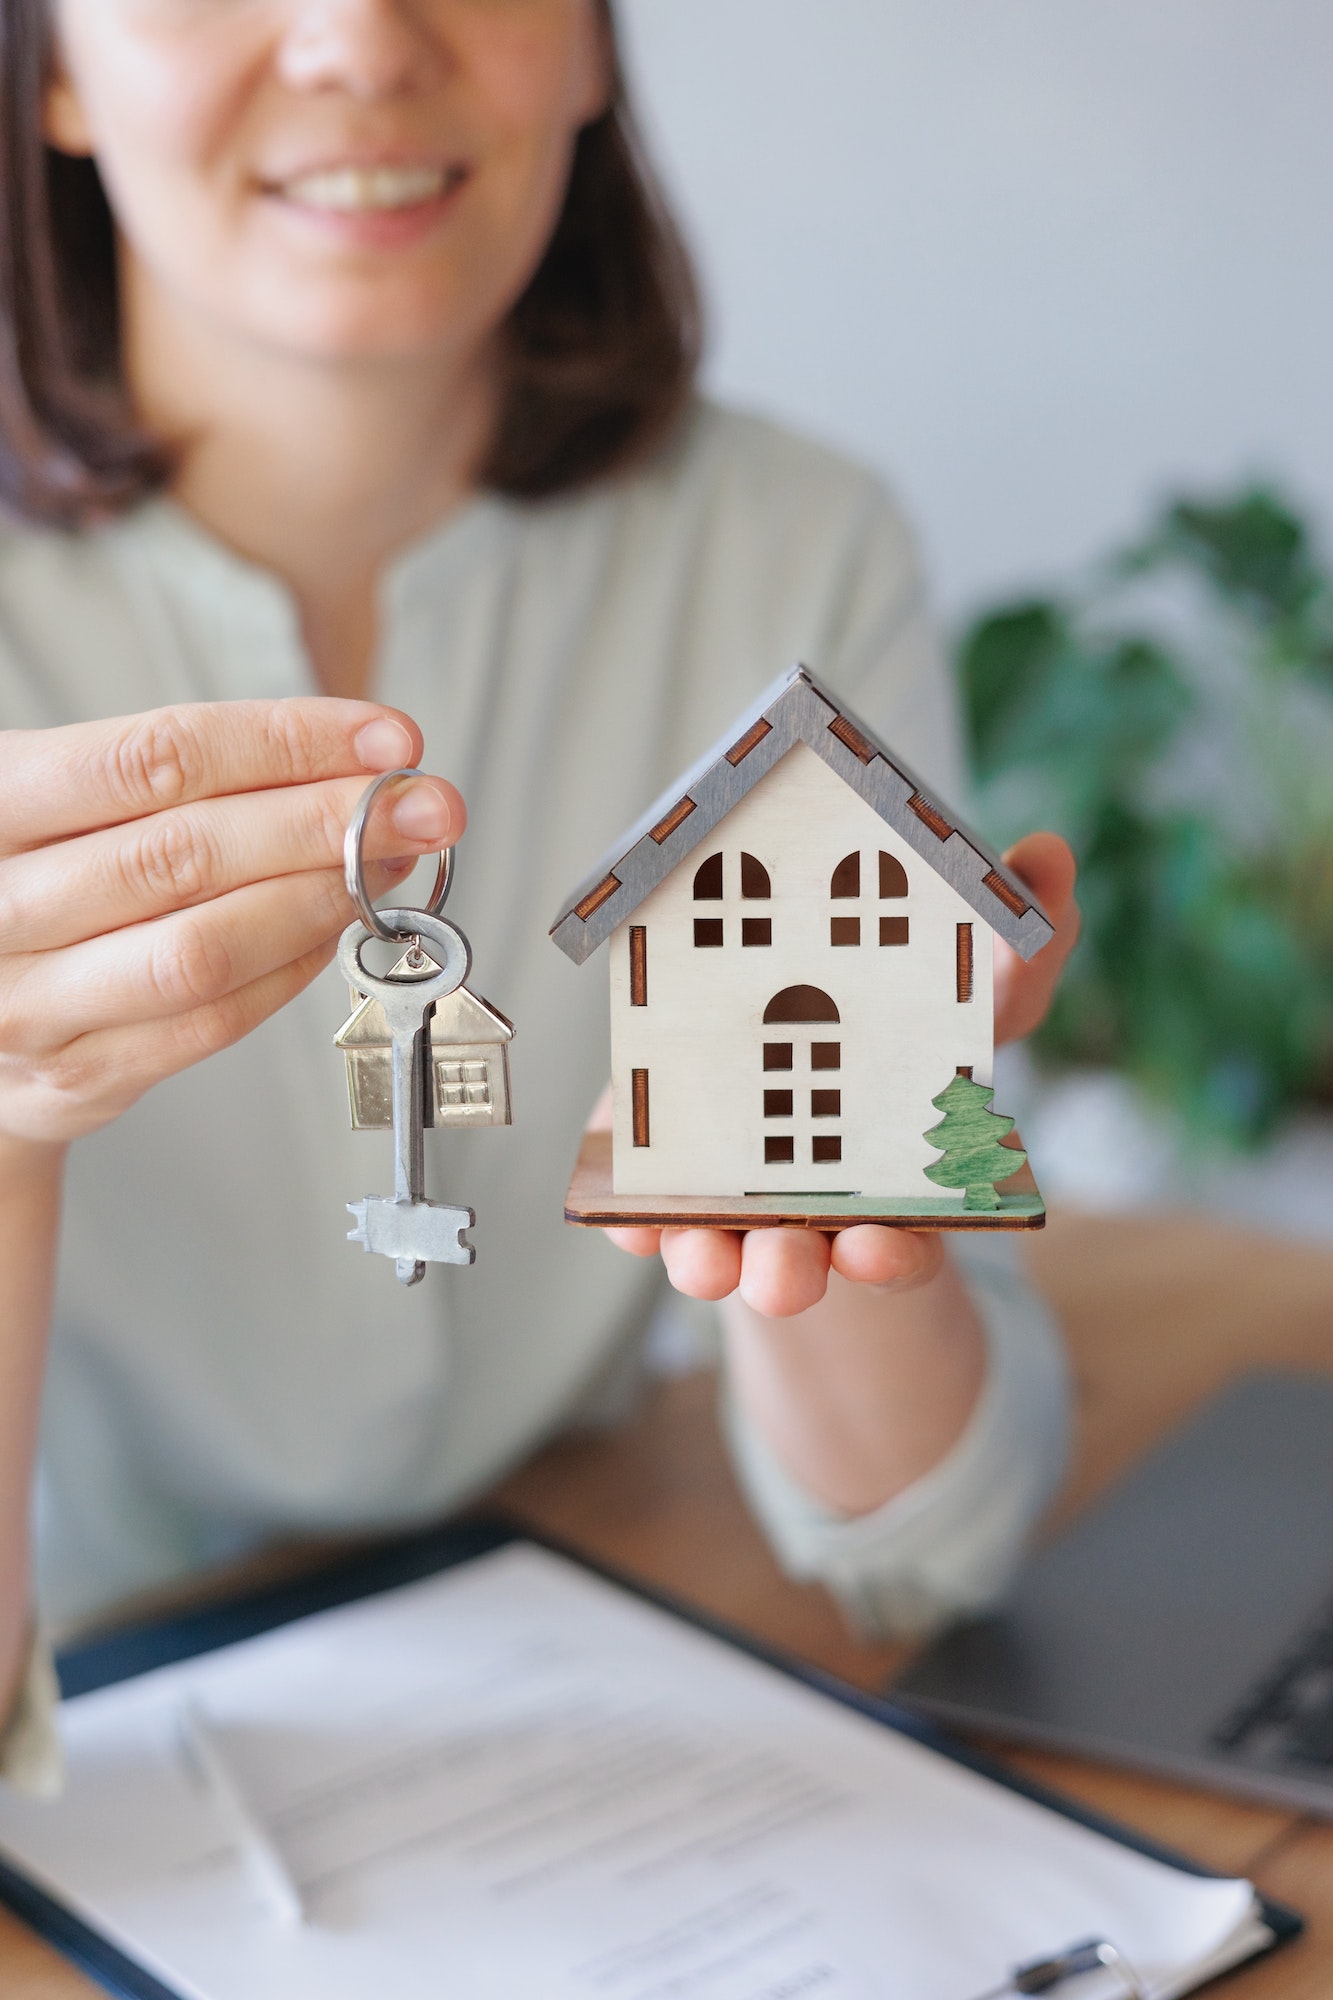 European woman realtor or mortgage agent consultant holds a miniature model of a house and keys